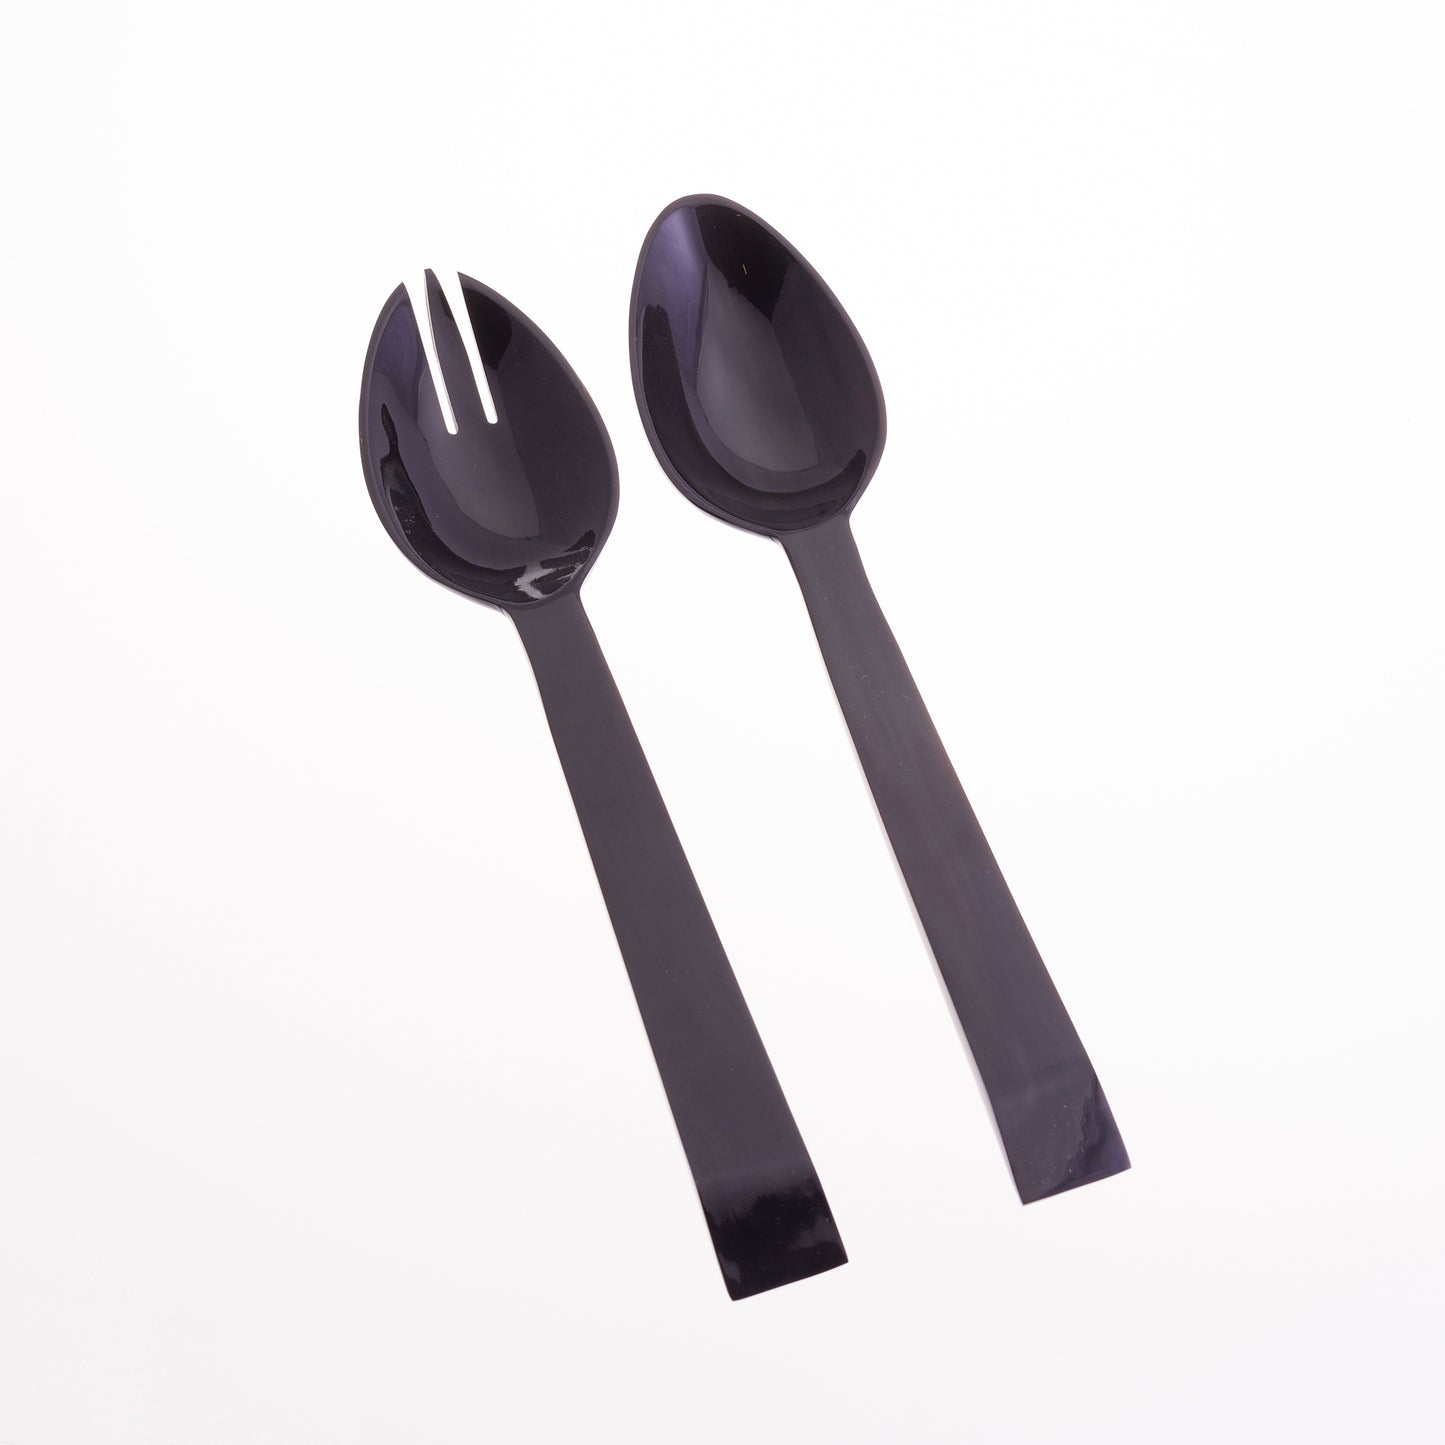 Black Horn Salad Servers with Square Tips